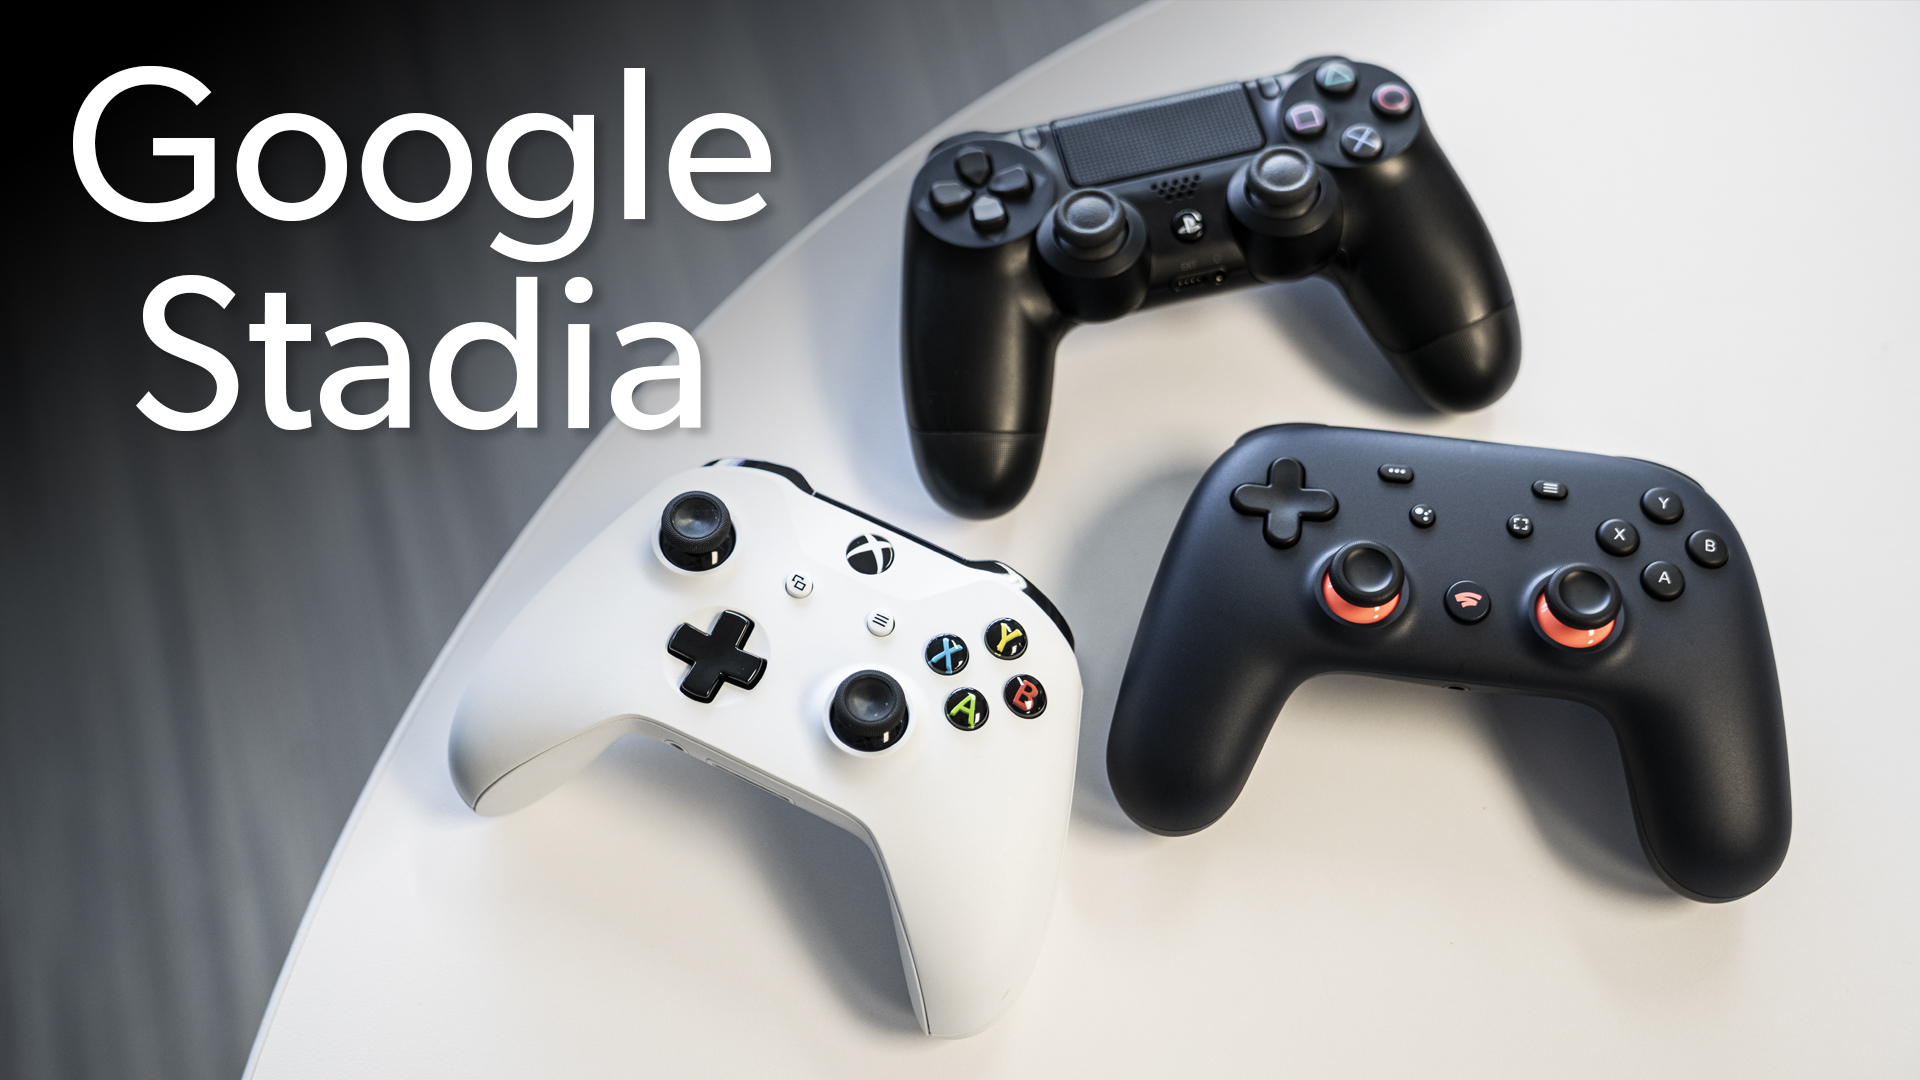 How to Use a Google Stadia